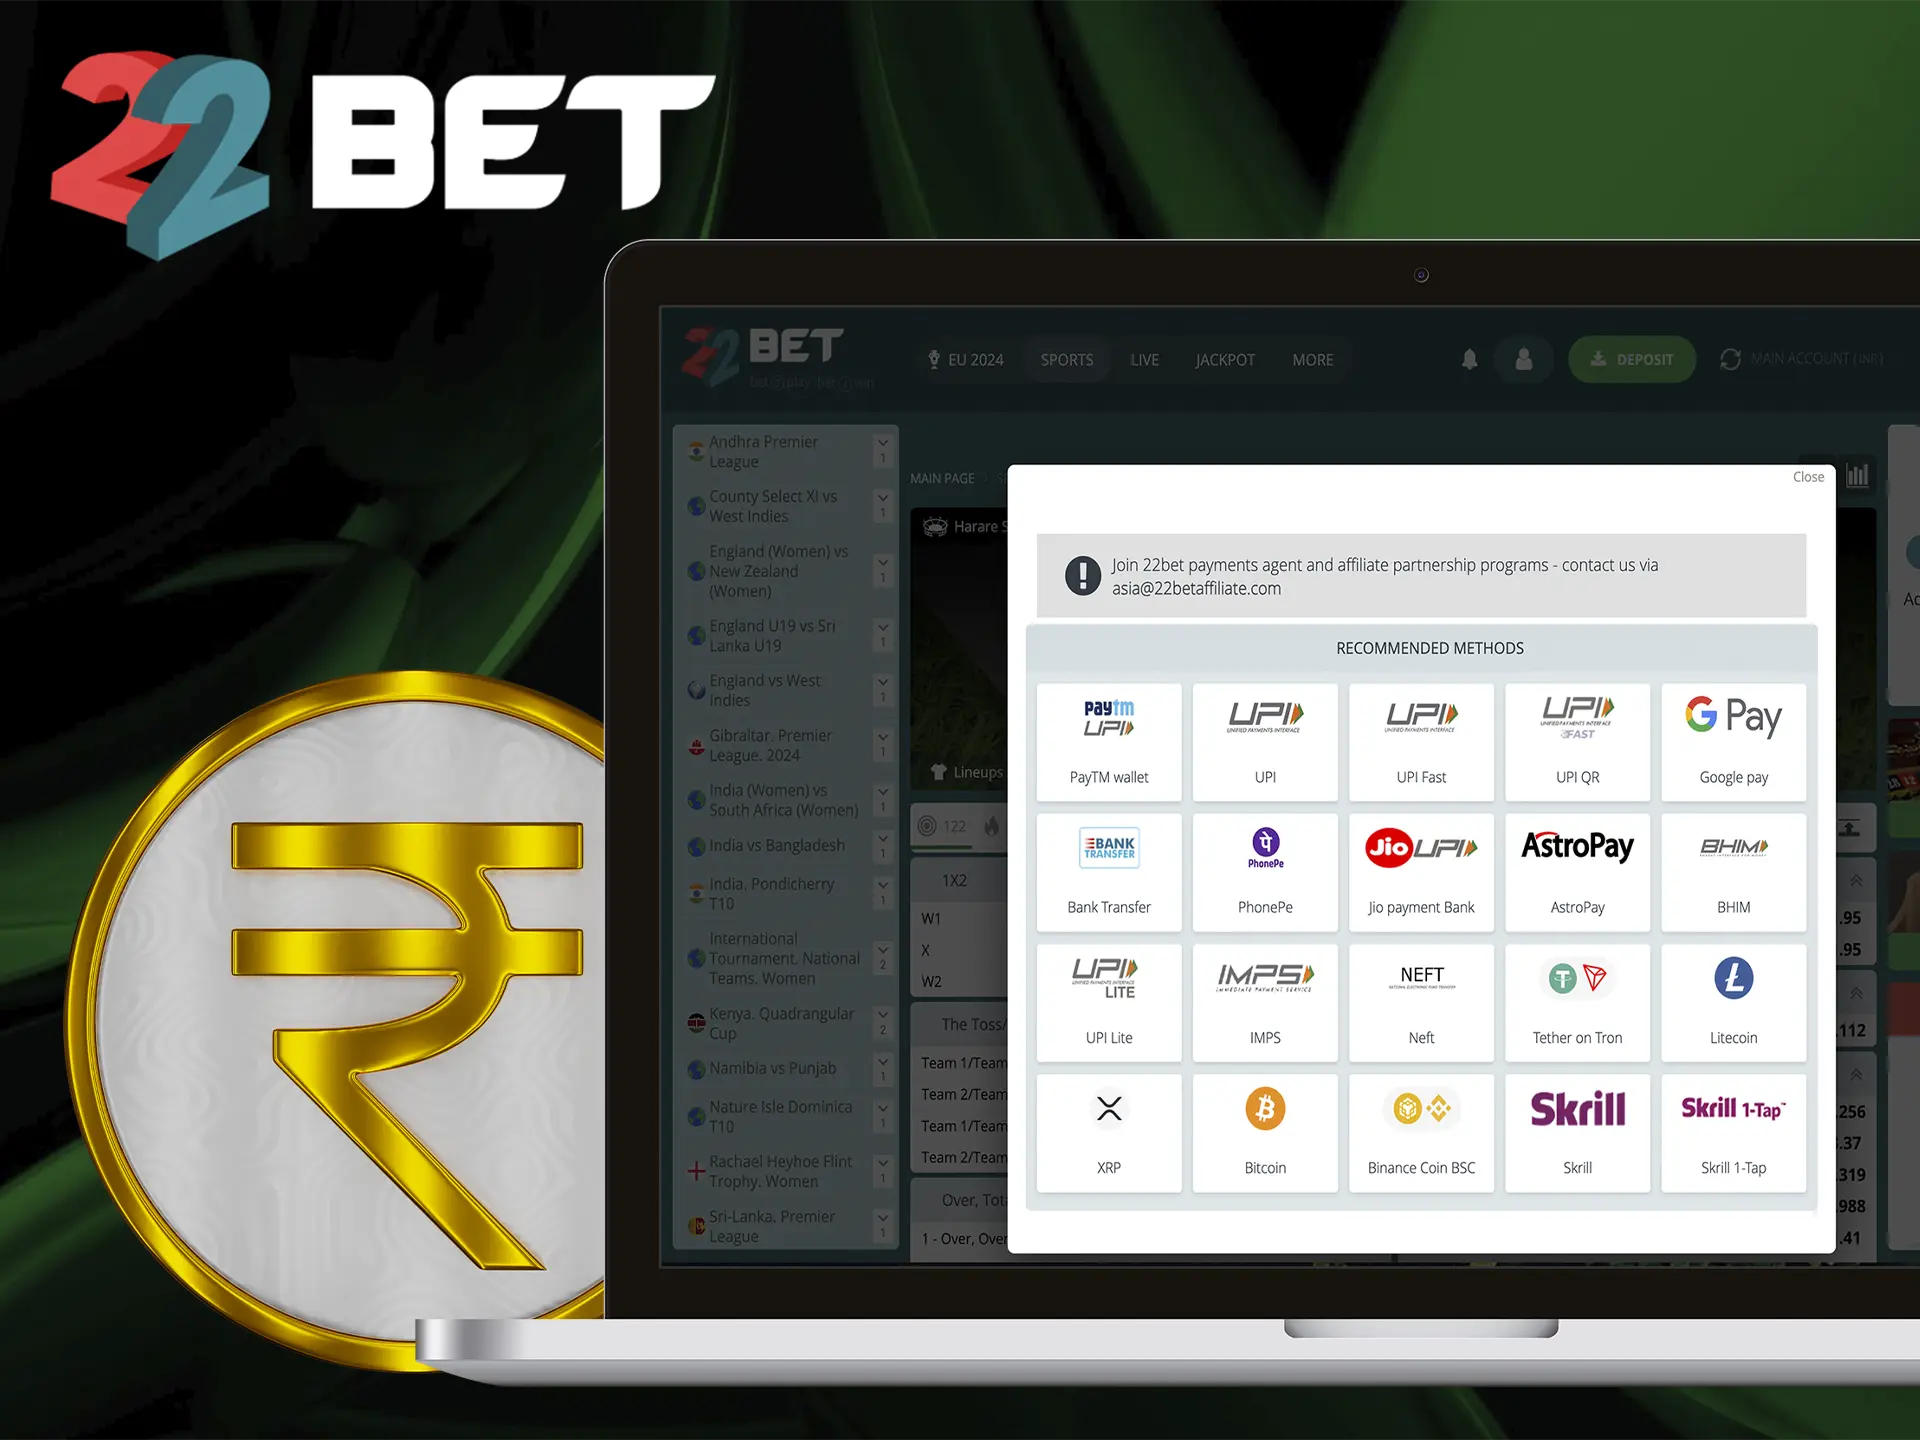 Take advantage of favourable and instant top-ups at 22Bet bookmaker.